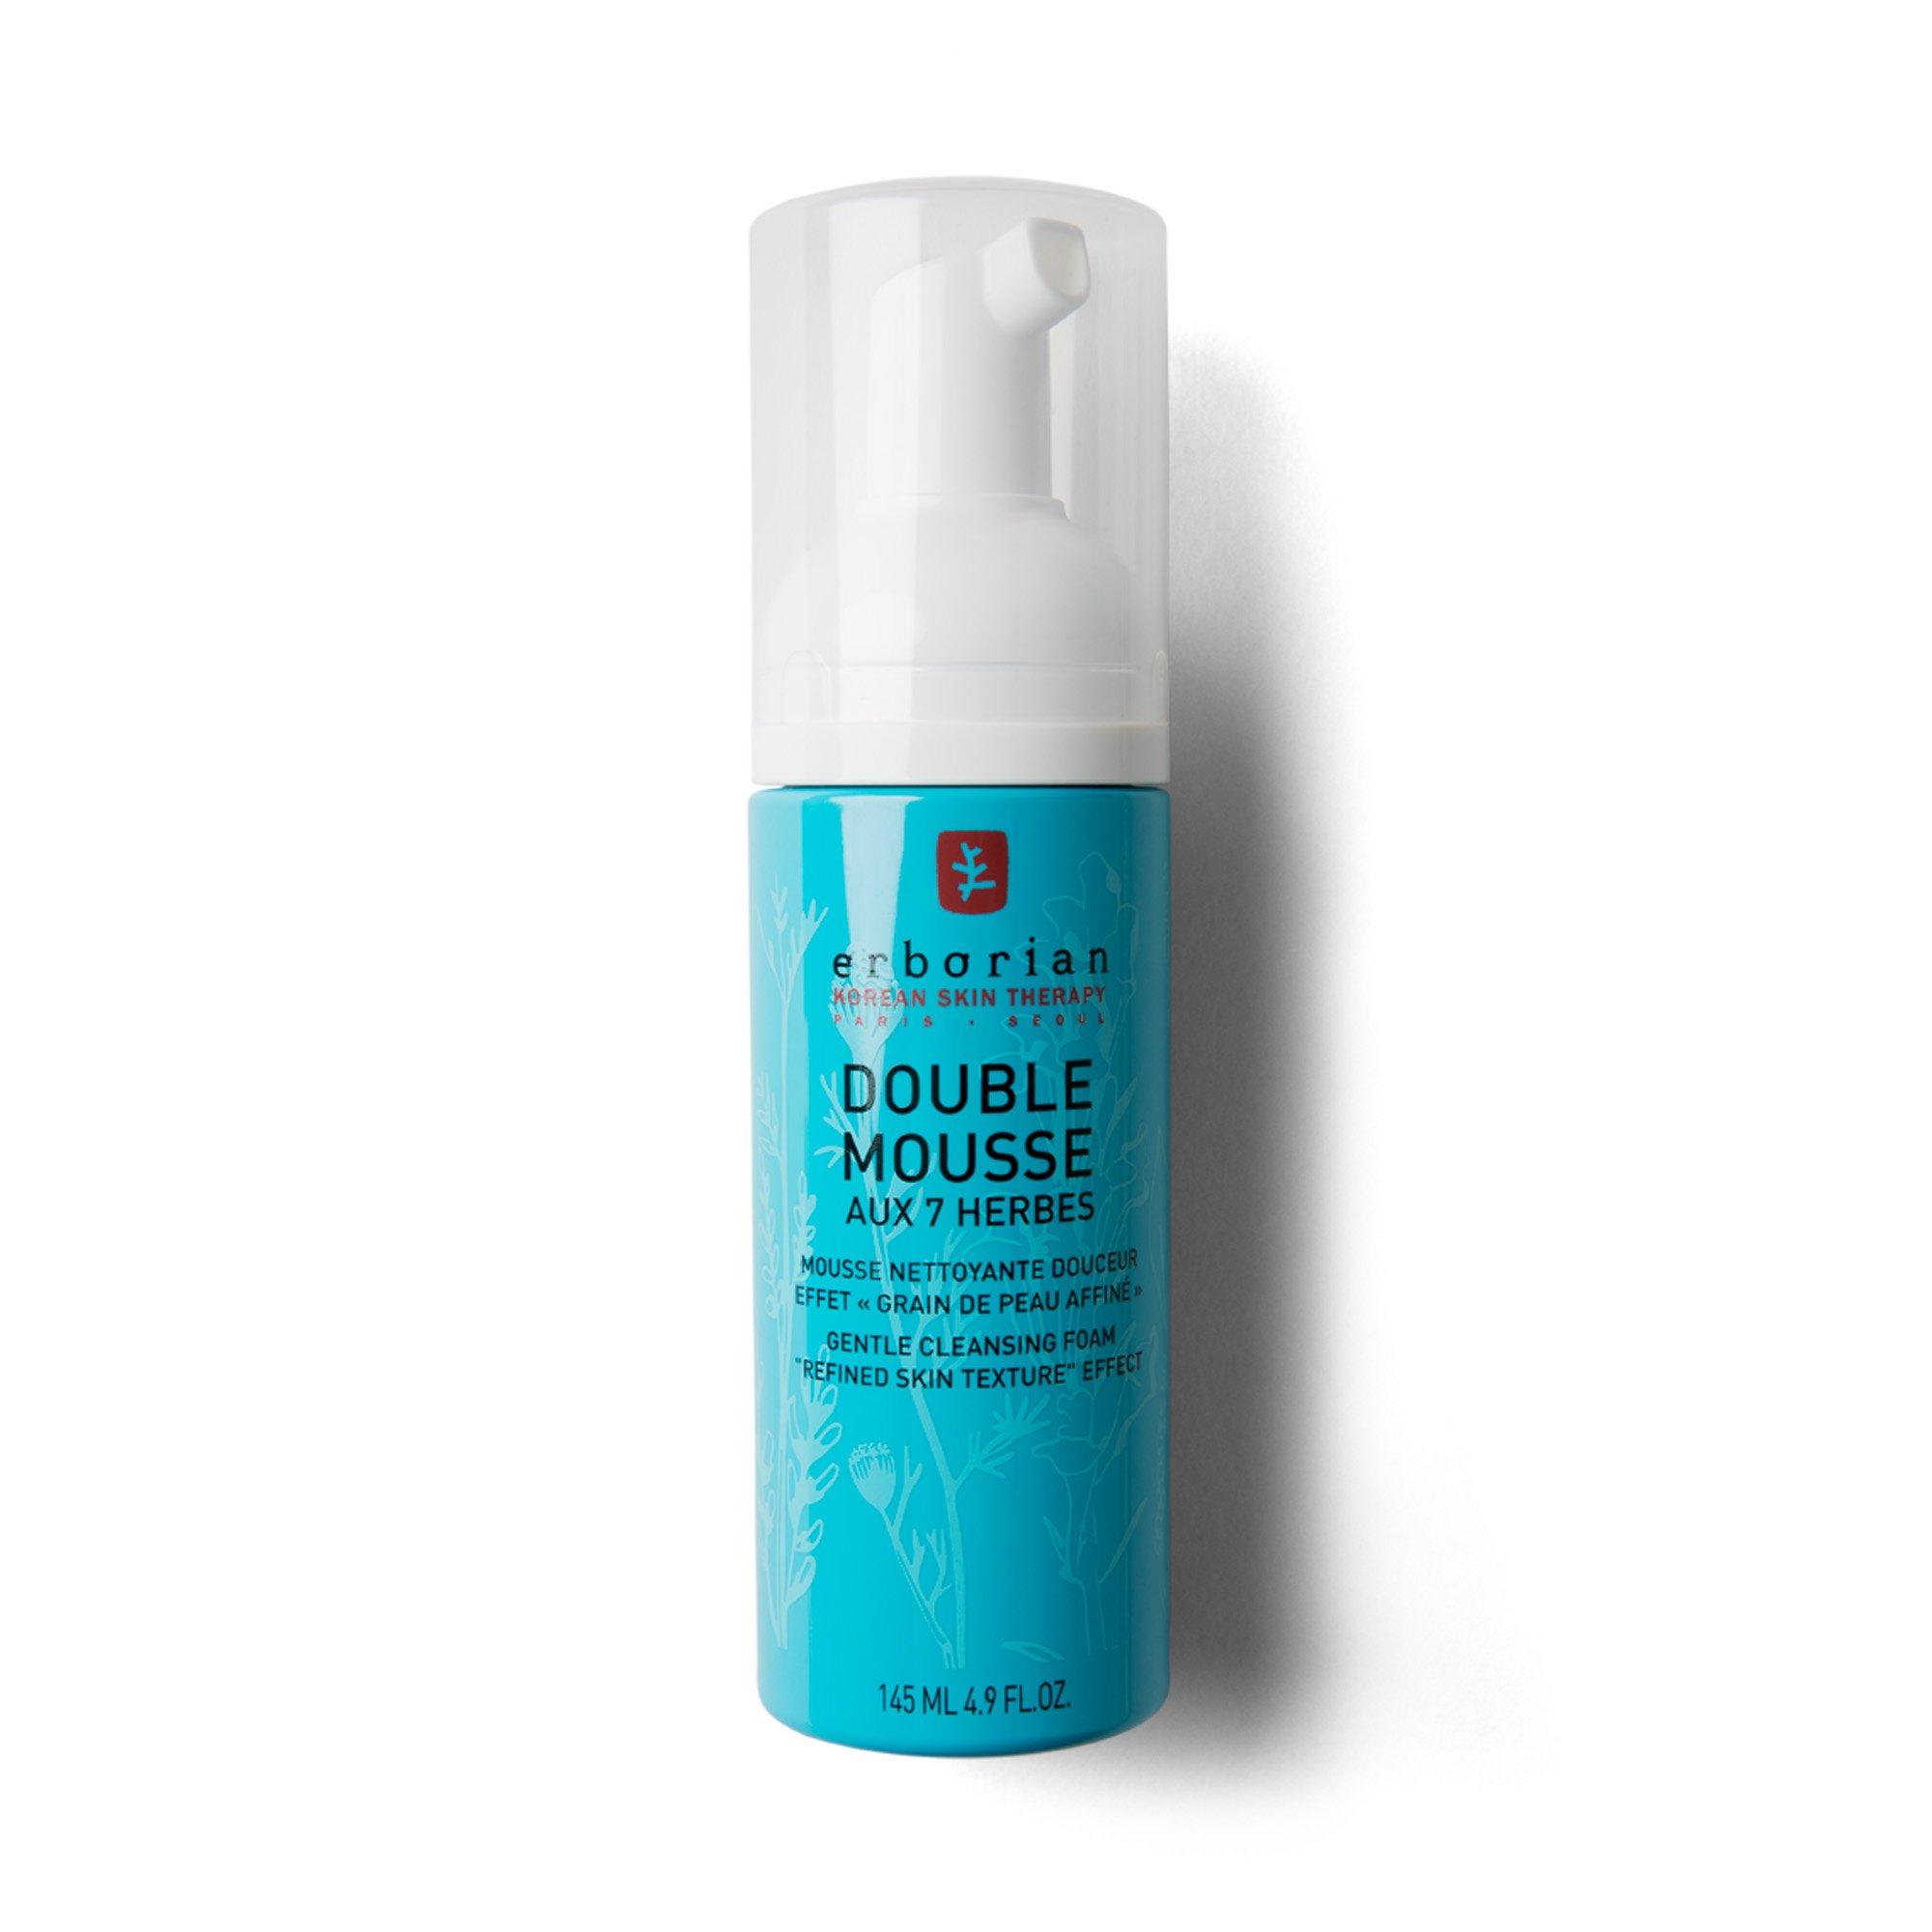 Image of erborian Double Mousse - 145ml